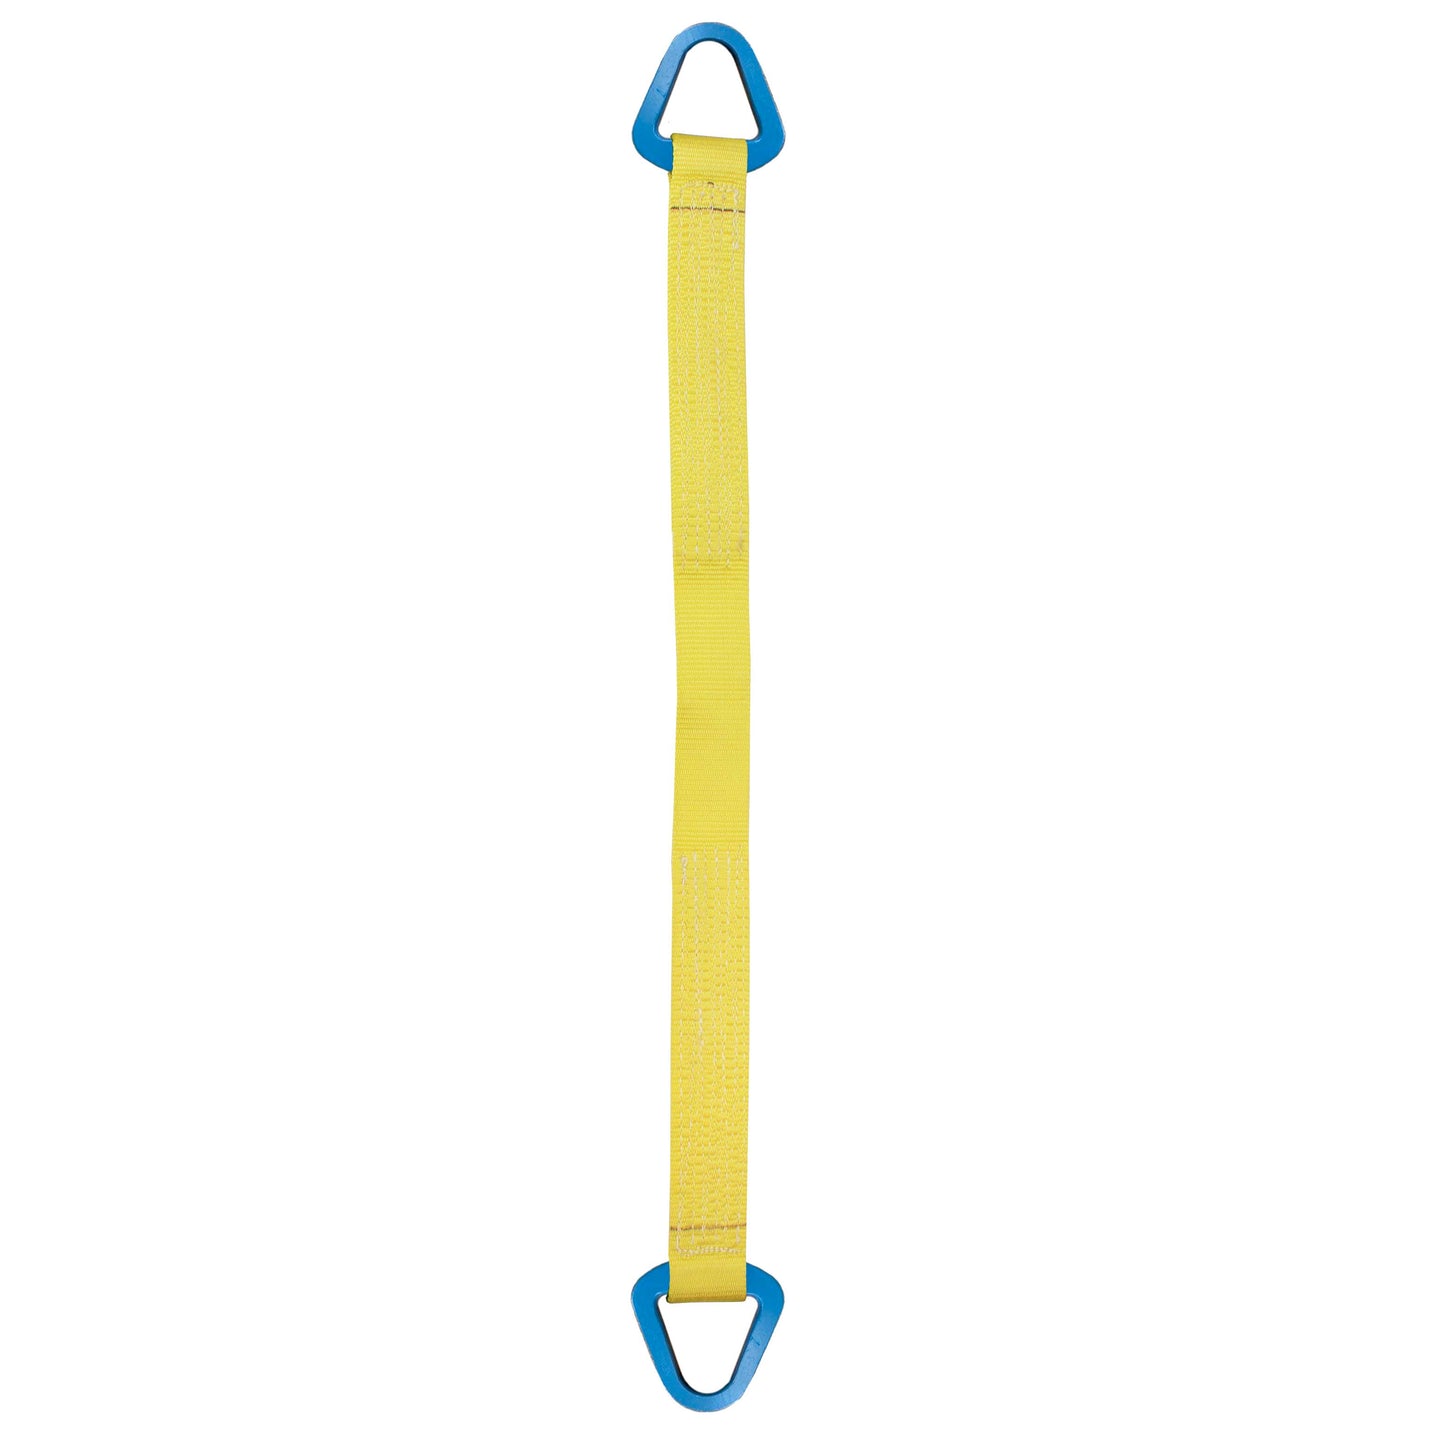 Nylon Lifting Sling Triangle 12 inch x 16 foot 2ply image 1 of 2